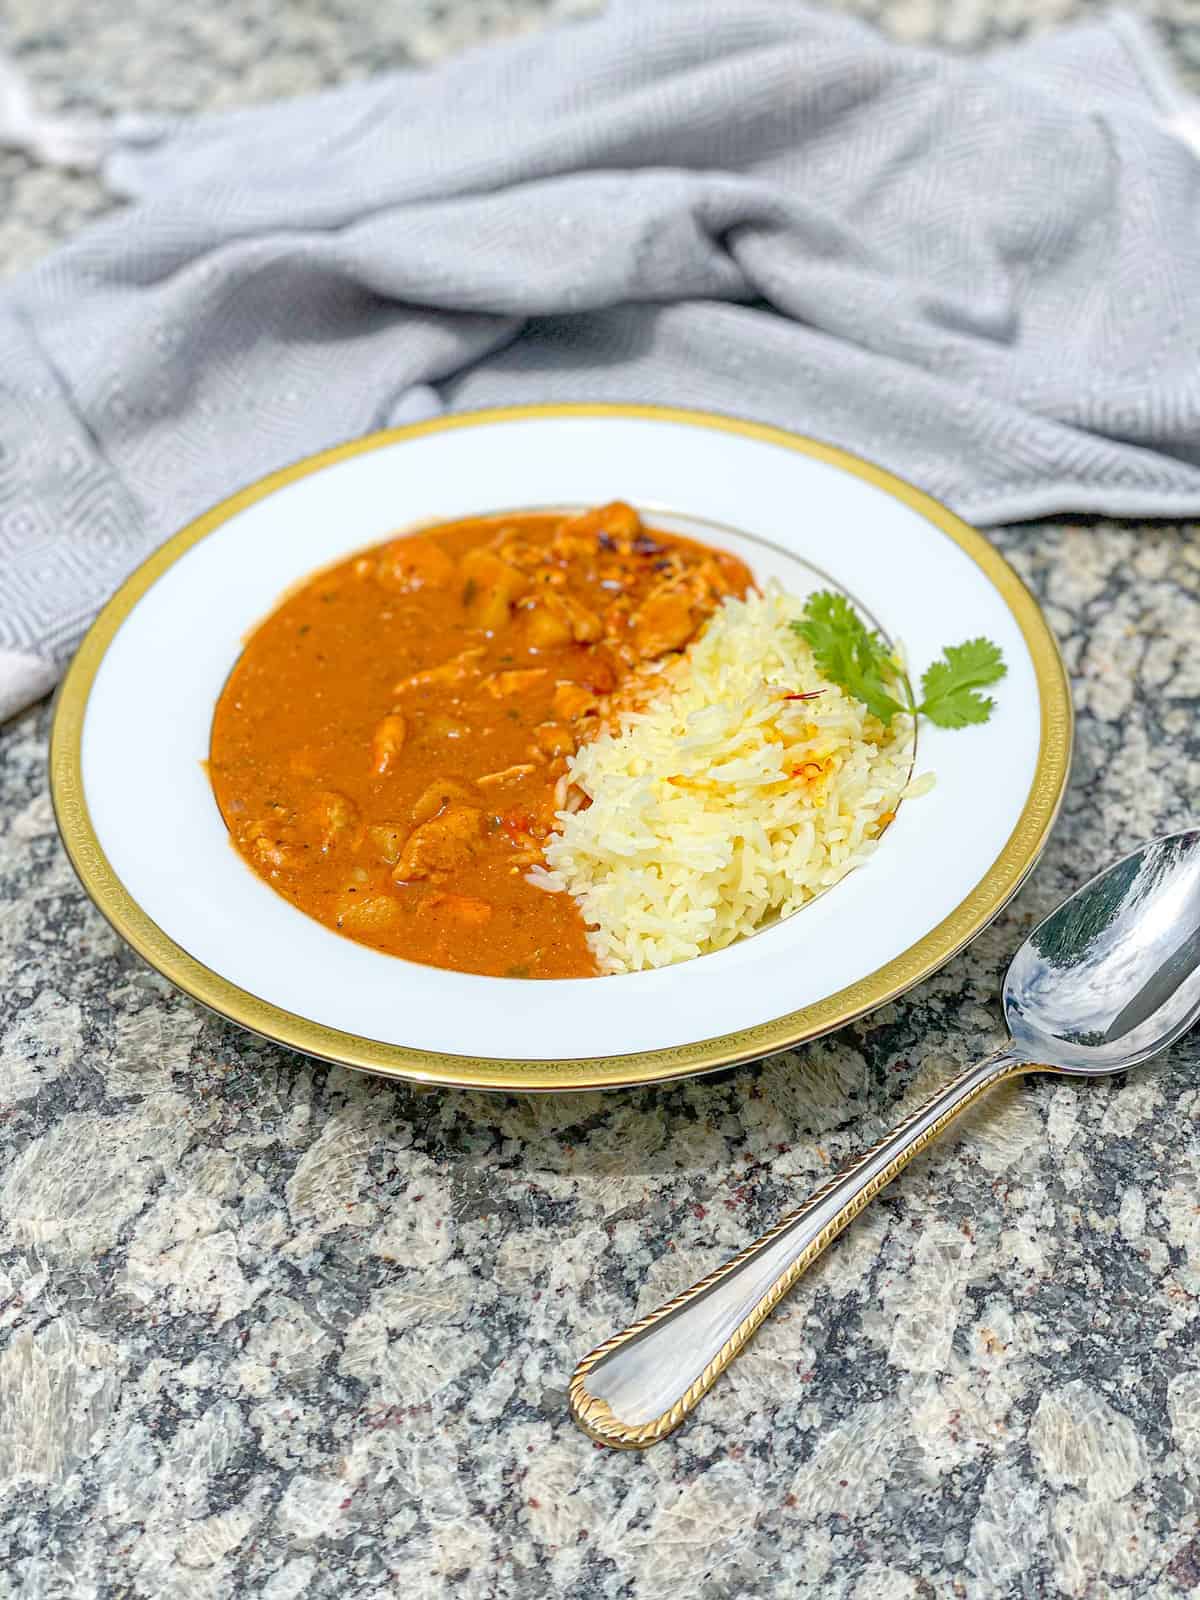 a plate of chicken tikka masala made by combining cubed chicken, potatoes, and onions infused with spices like curry, coriander, and cumin in a creamy tikka masala simmered sauce